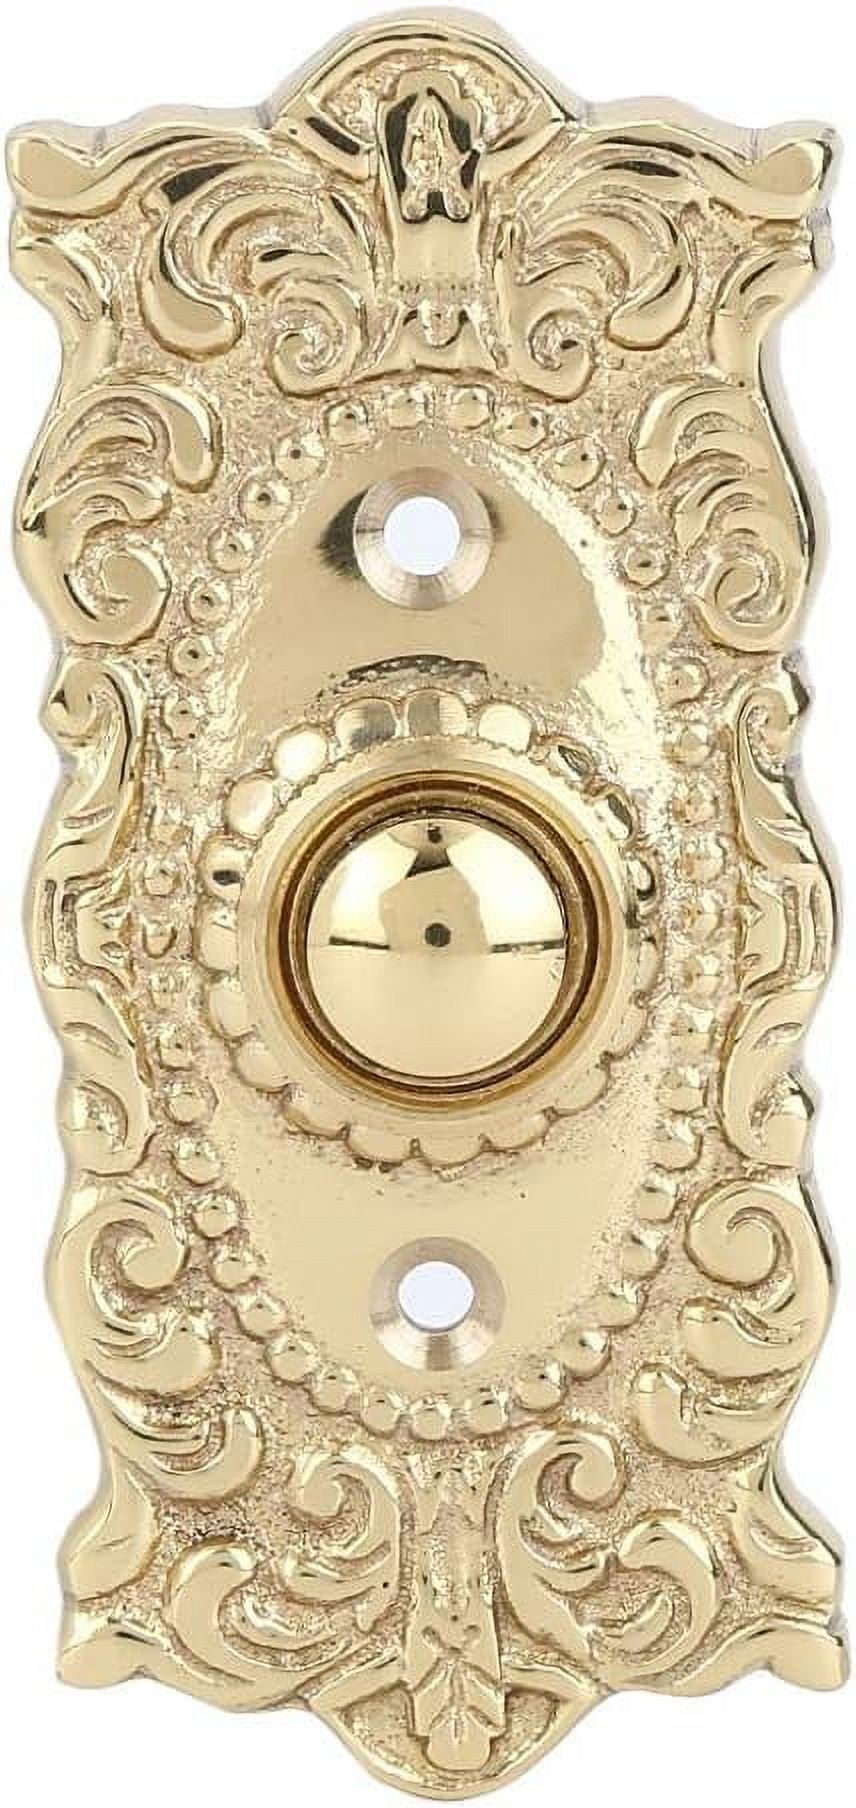 BRASS BELL PUSH BUTTON POLISHED LACQUERED Wired Brass Doorbell